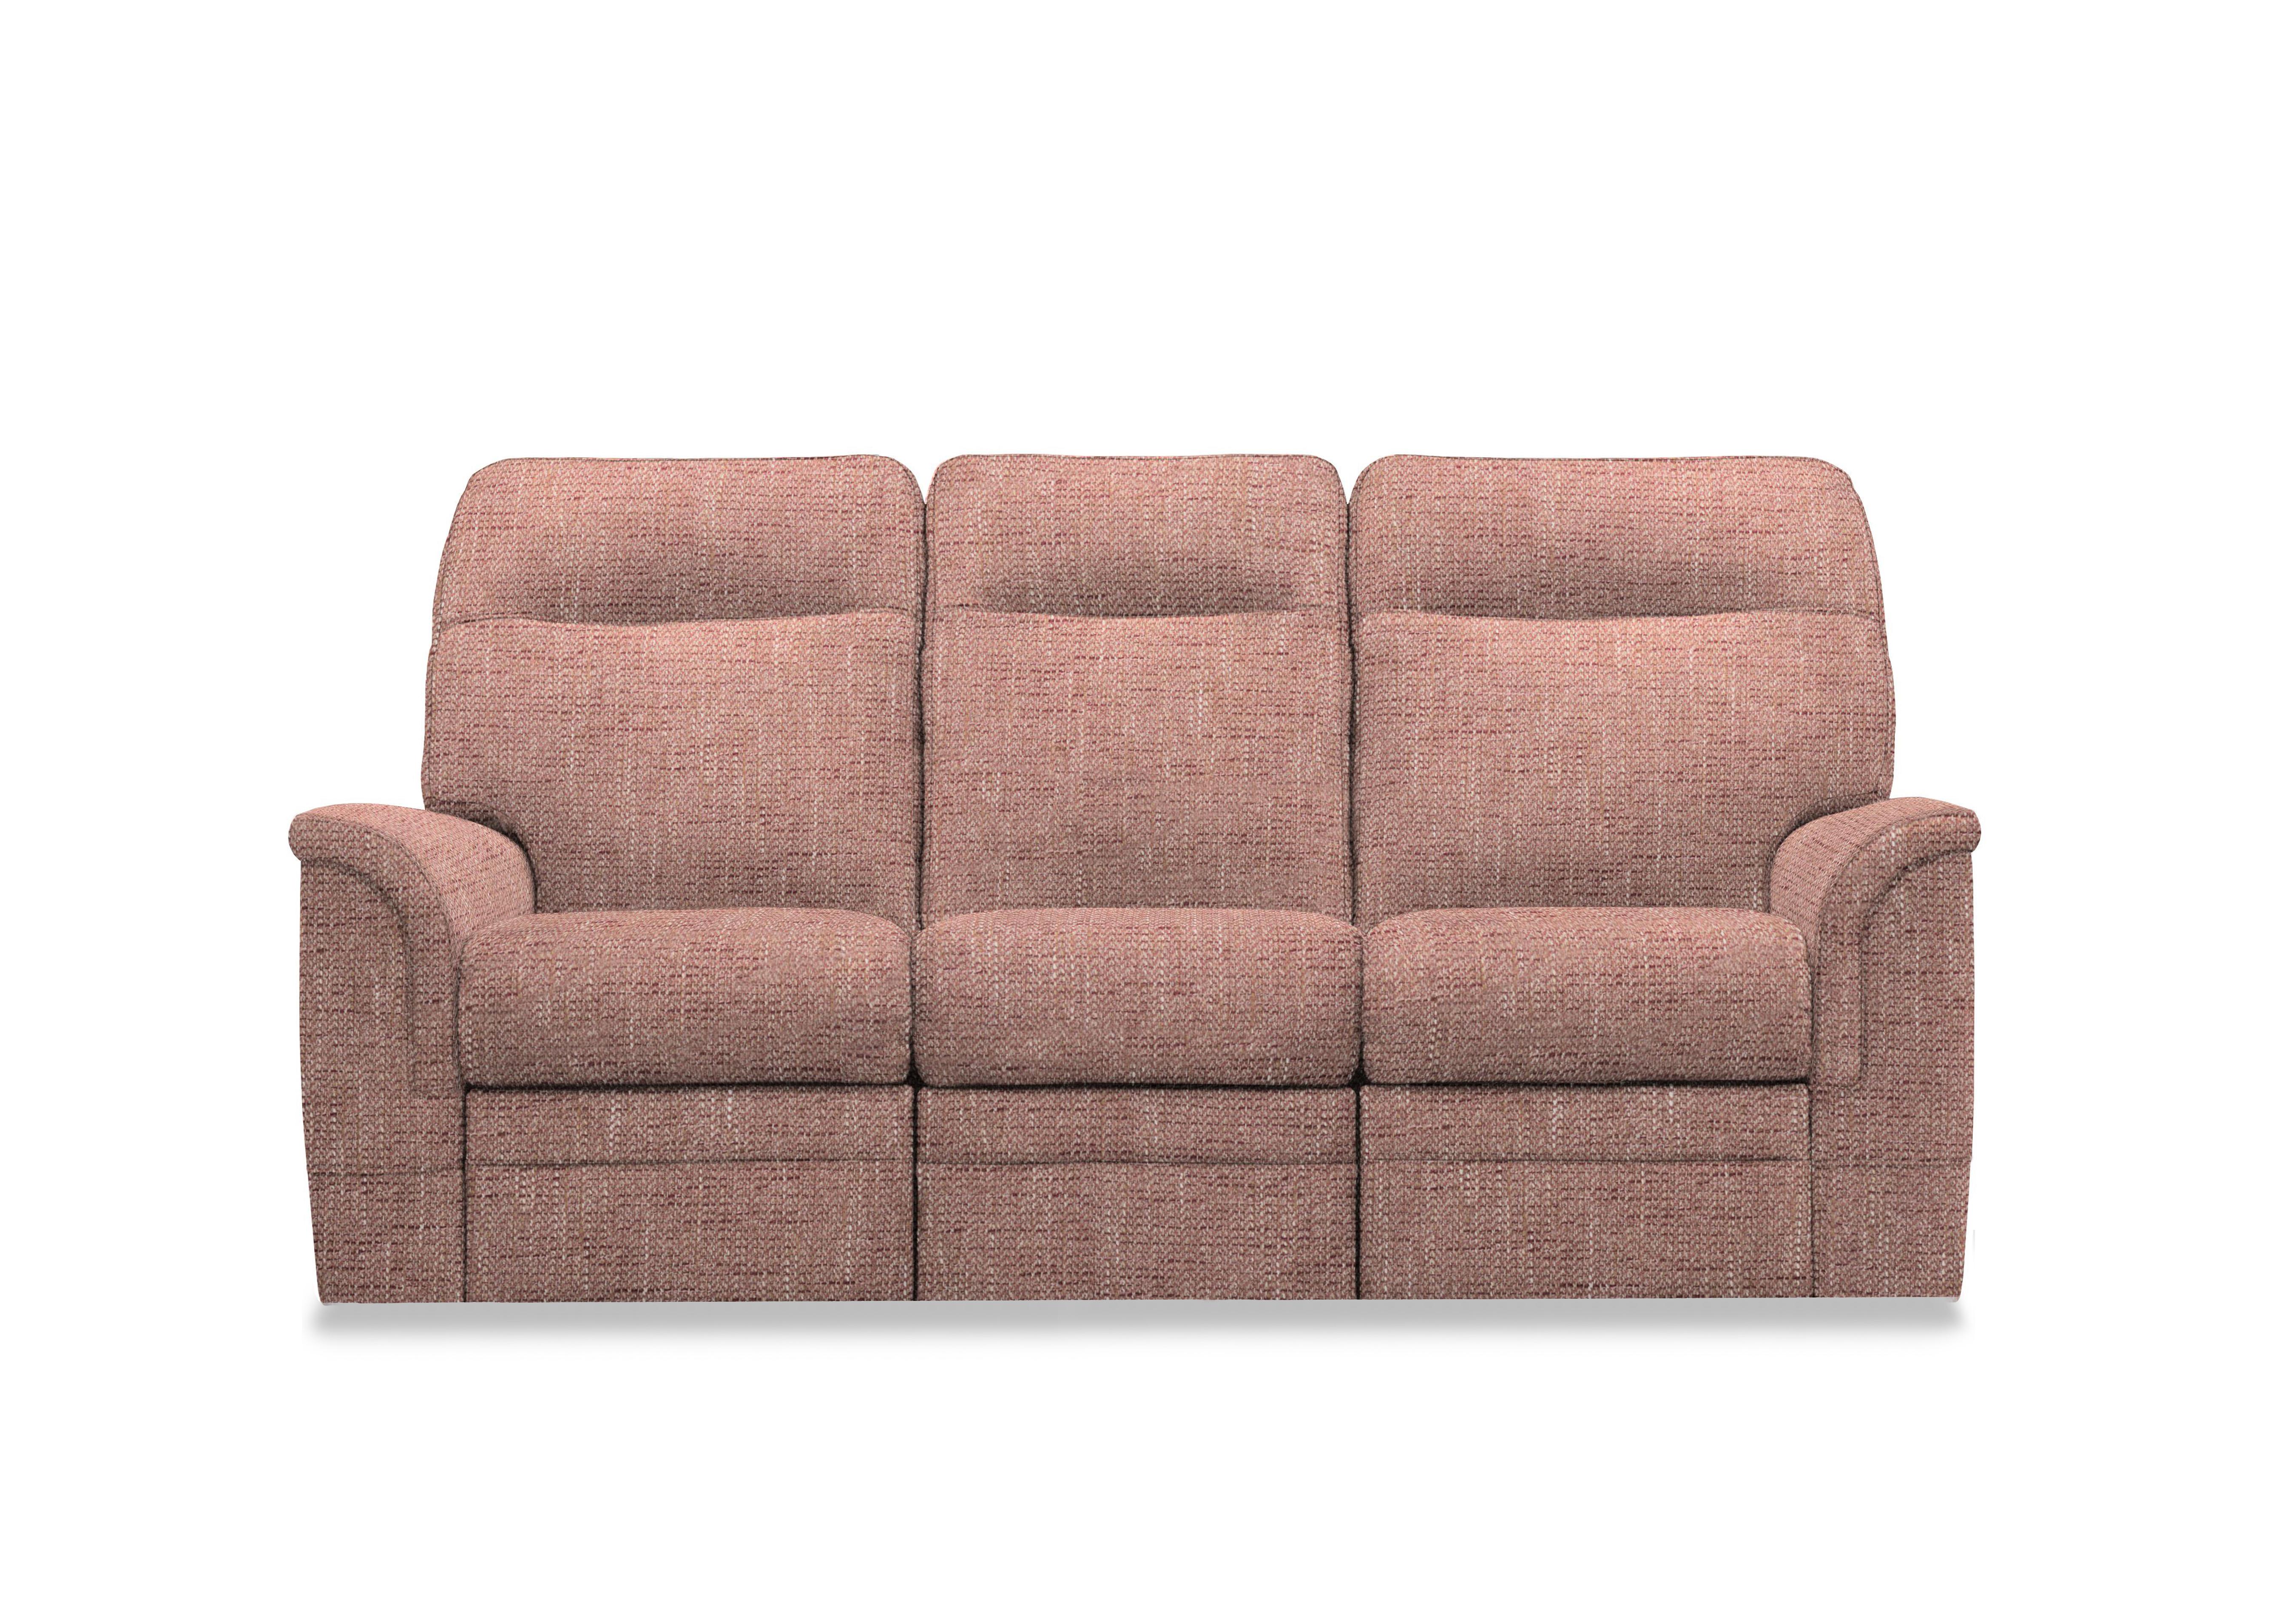 Hudson 23 Fabric 3 Seater Sofa in Country Rose 001409-0003 on Furniture Village